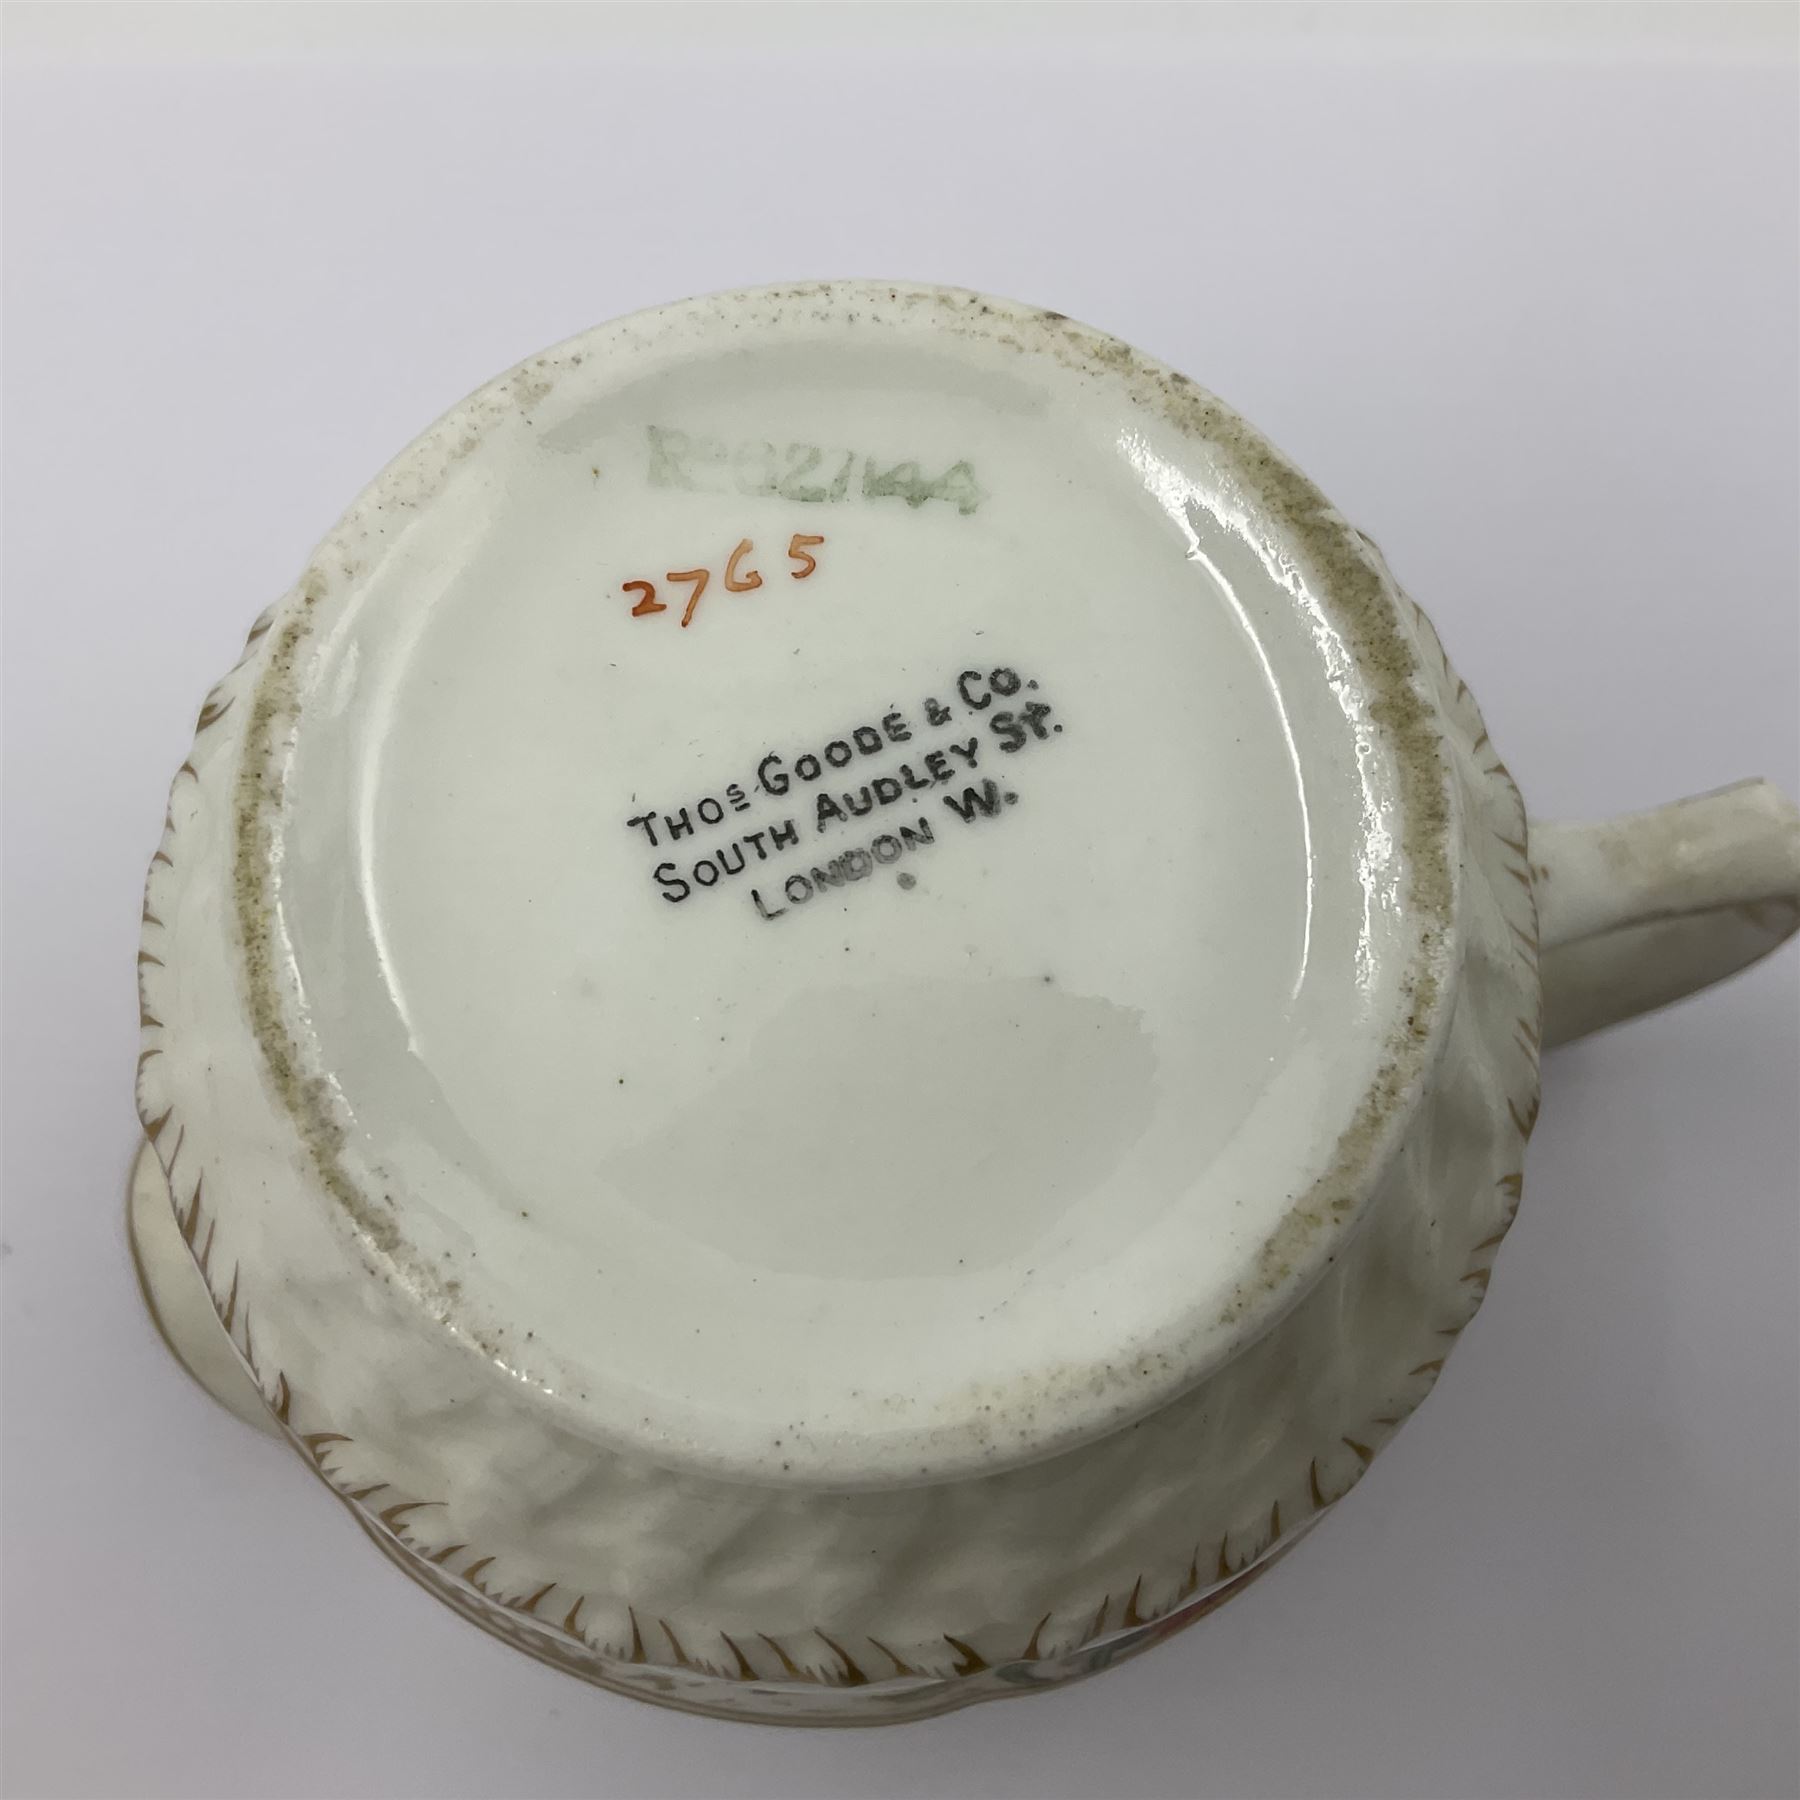 19th century Thomas Goode and Co jug - Image 10 of 22